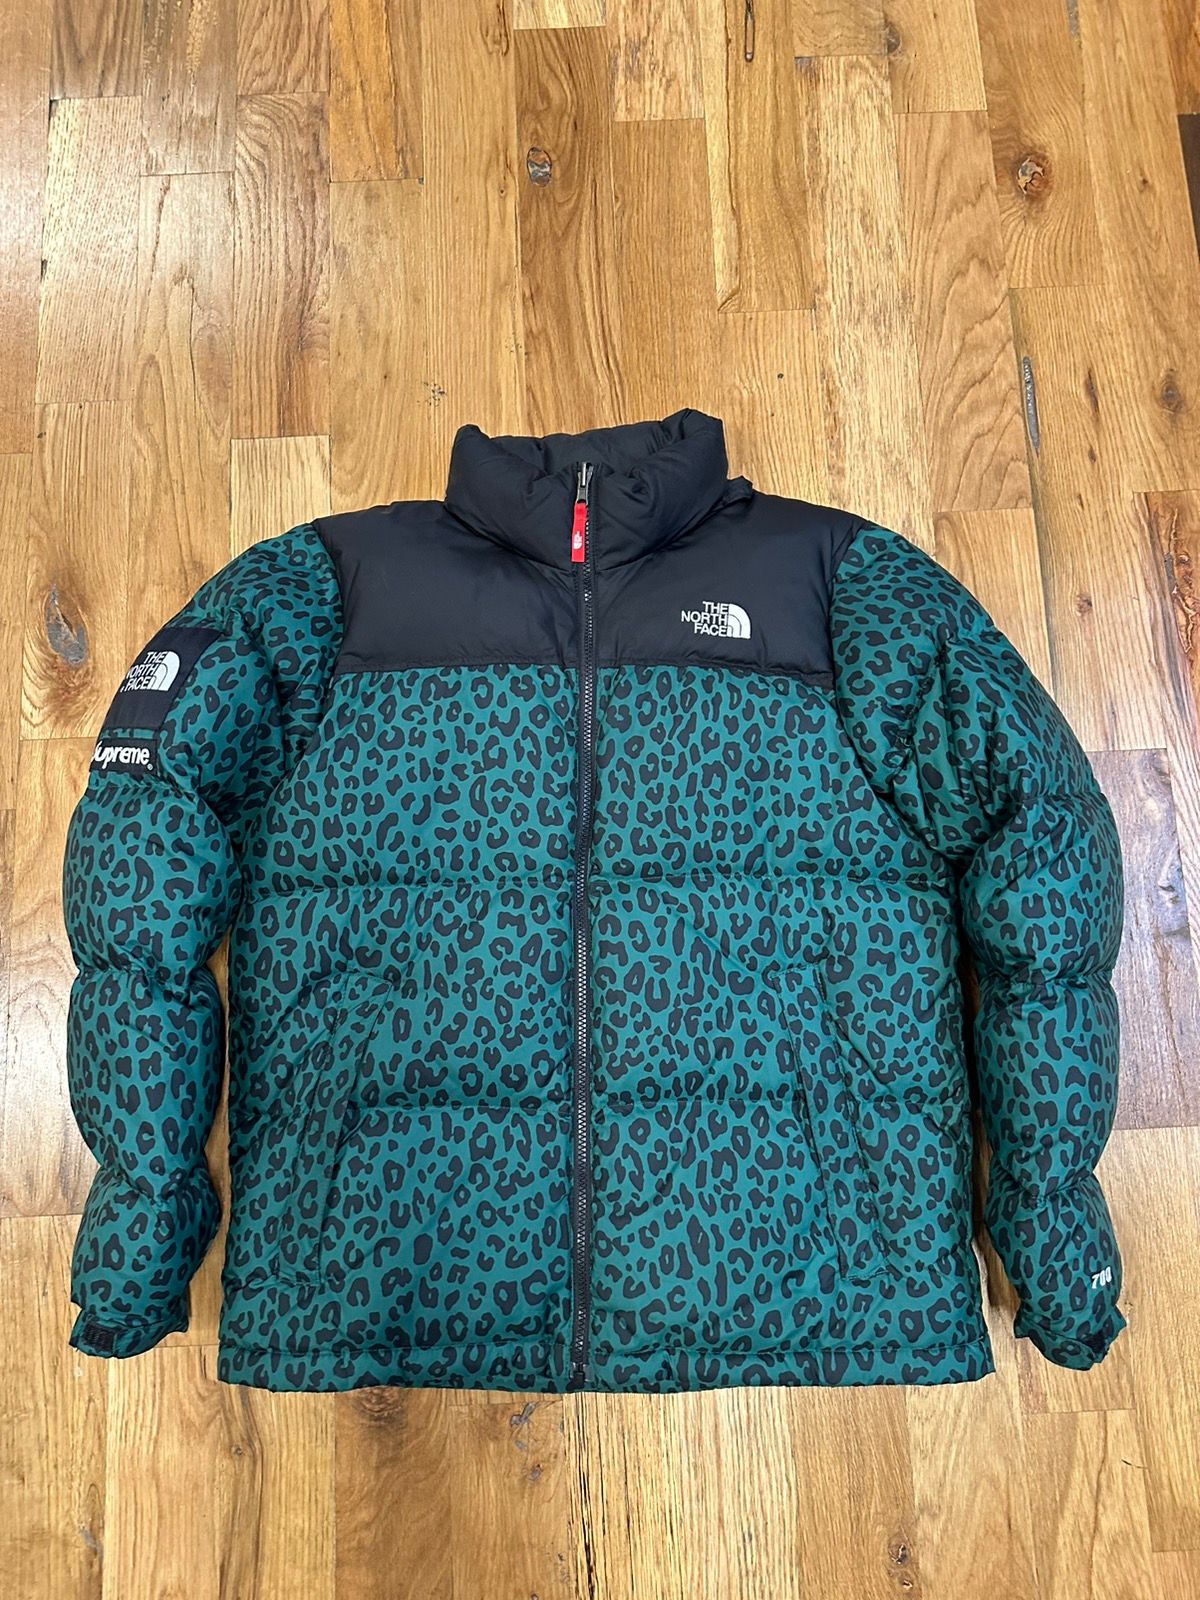 Pre-owned Supreme X The North Face Supreme Tnf Green Leopard Nupste Jacket Size Medium (fw12)